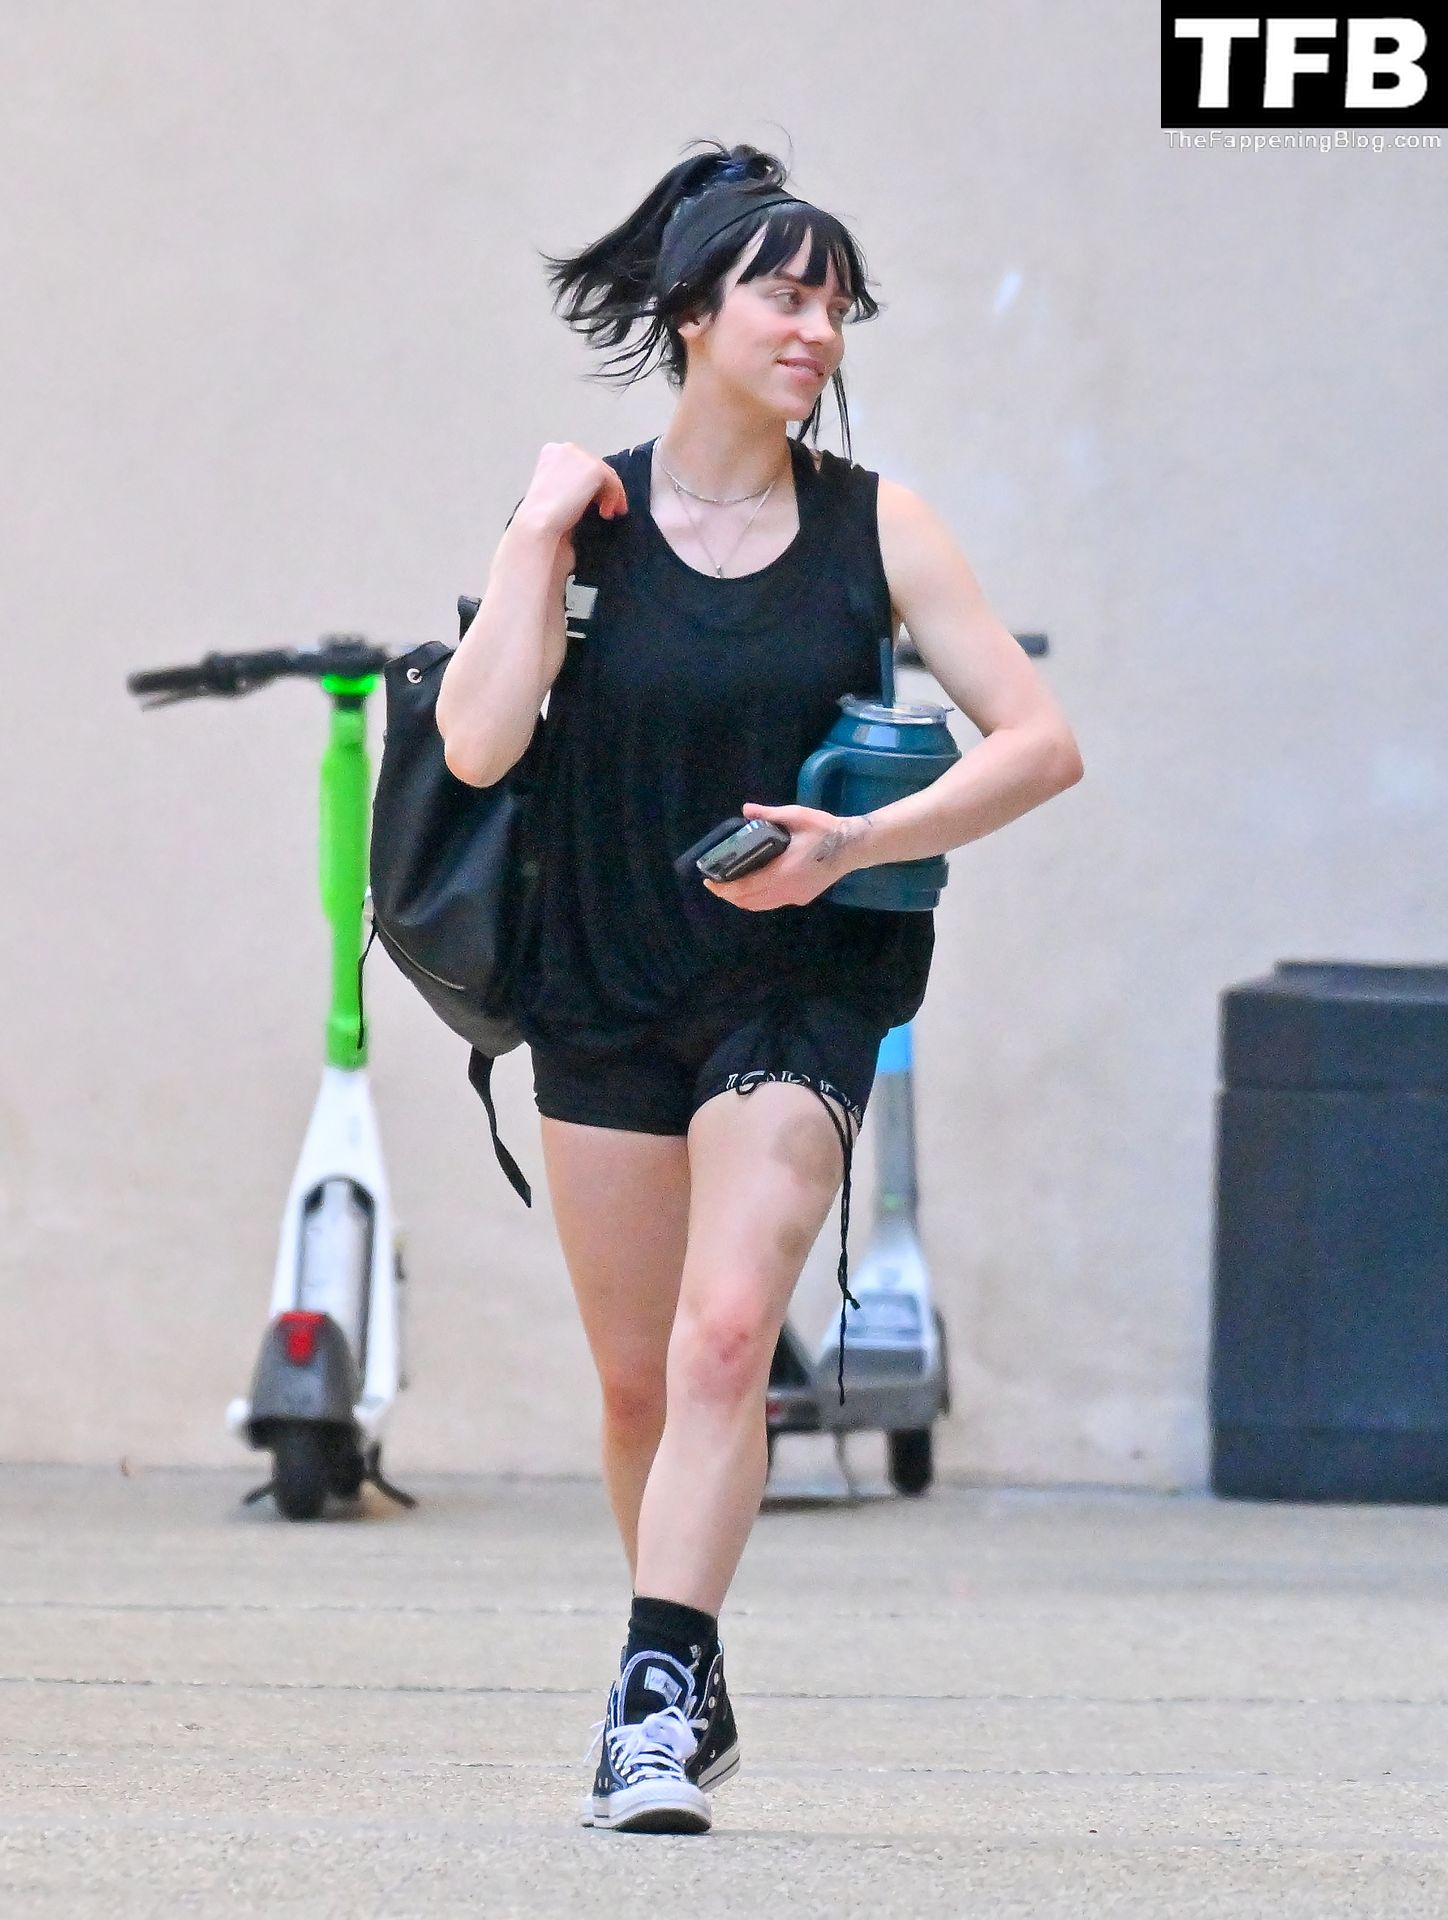 Billie Eilish Sexy The Fappening Blog 6 - Billie Eilish Keeps Up Her Fitness Regime, Stepping Out For Another Workout in Studio City (26 Photos)